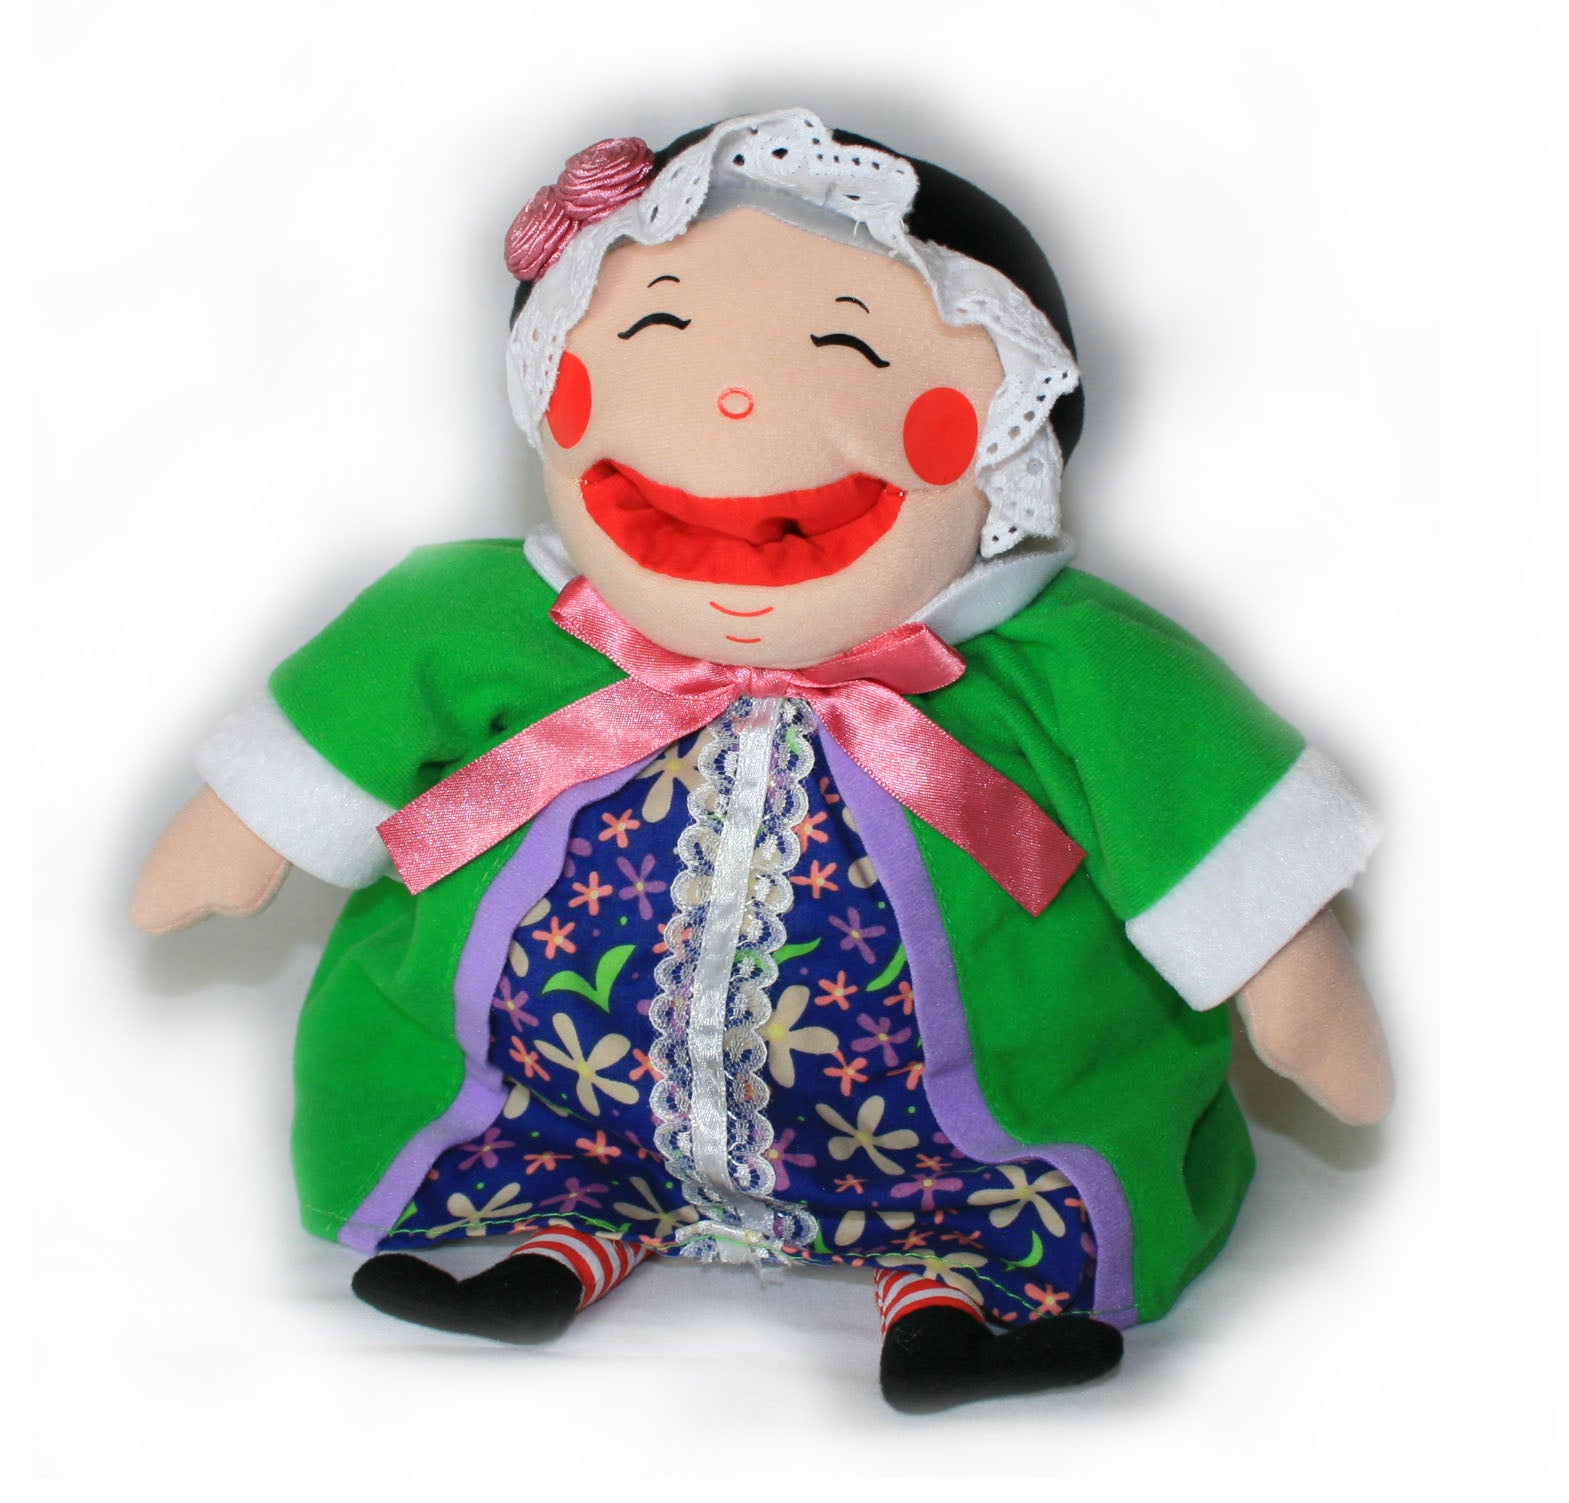 Old Lady who Swallowed a Fly Doll – Child's Play